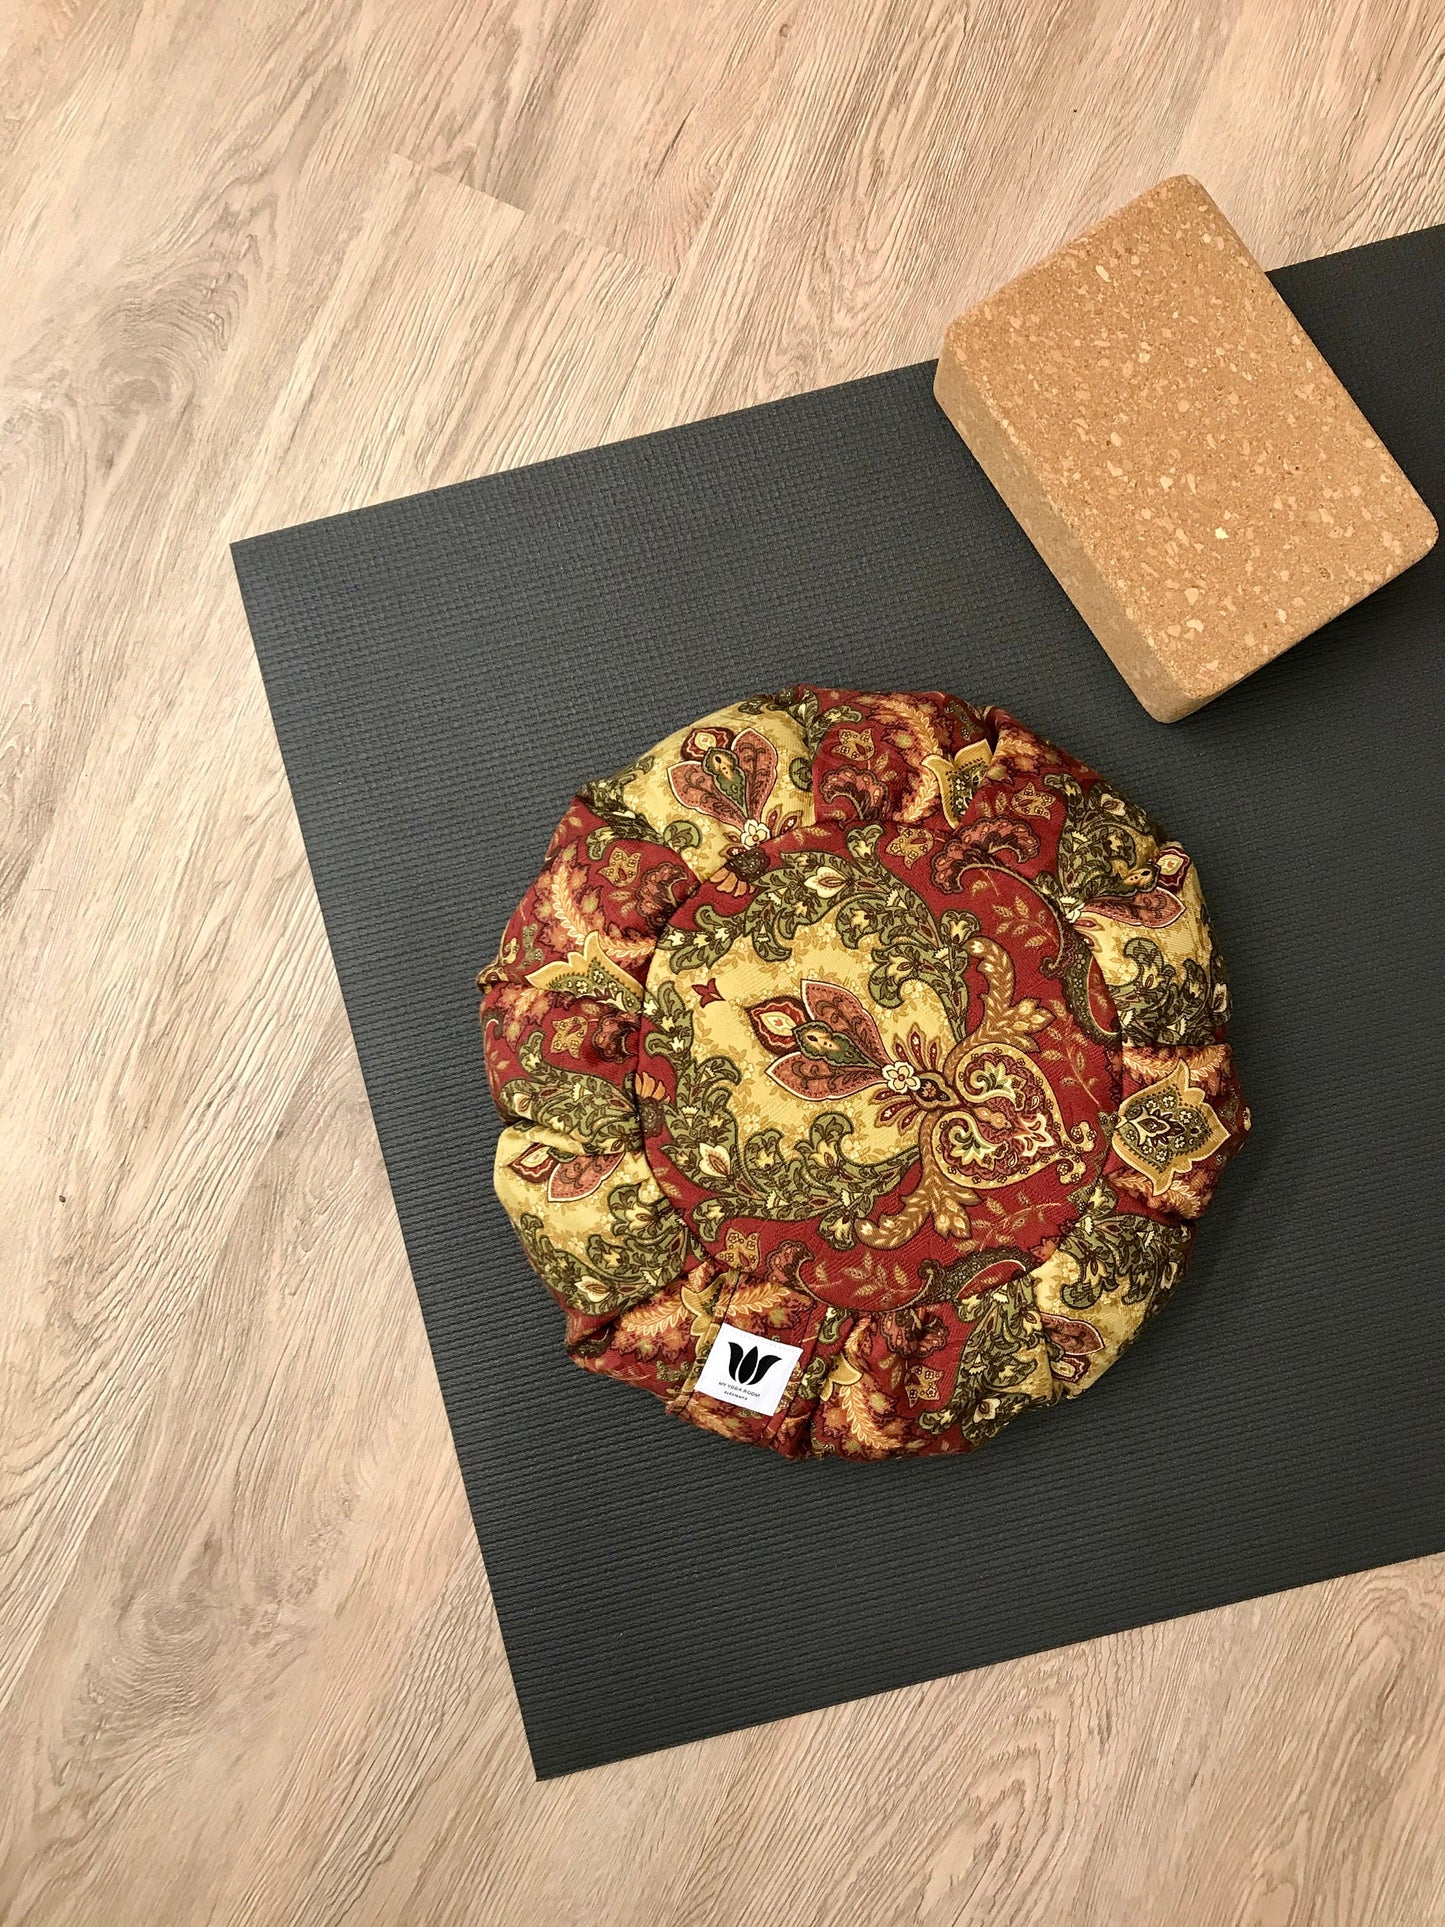 Handcrafted premium cotton canvas fabric meditation seat cushion in cranberry red, rich gold and green damask print fabric. Align the spine and body in comfort to calm the monkey mind in your meditation practice. Handcrafted in Calgary, Alberta Canada